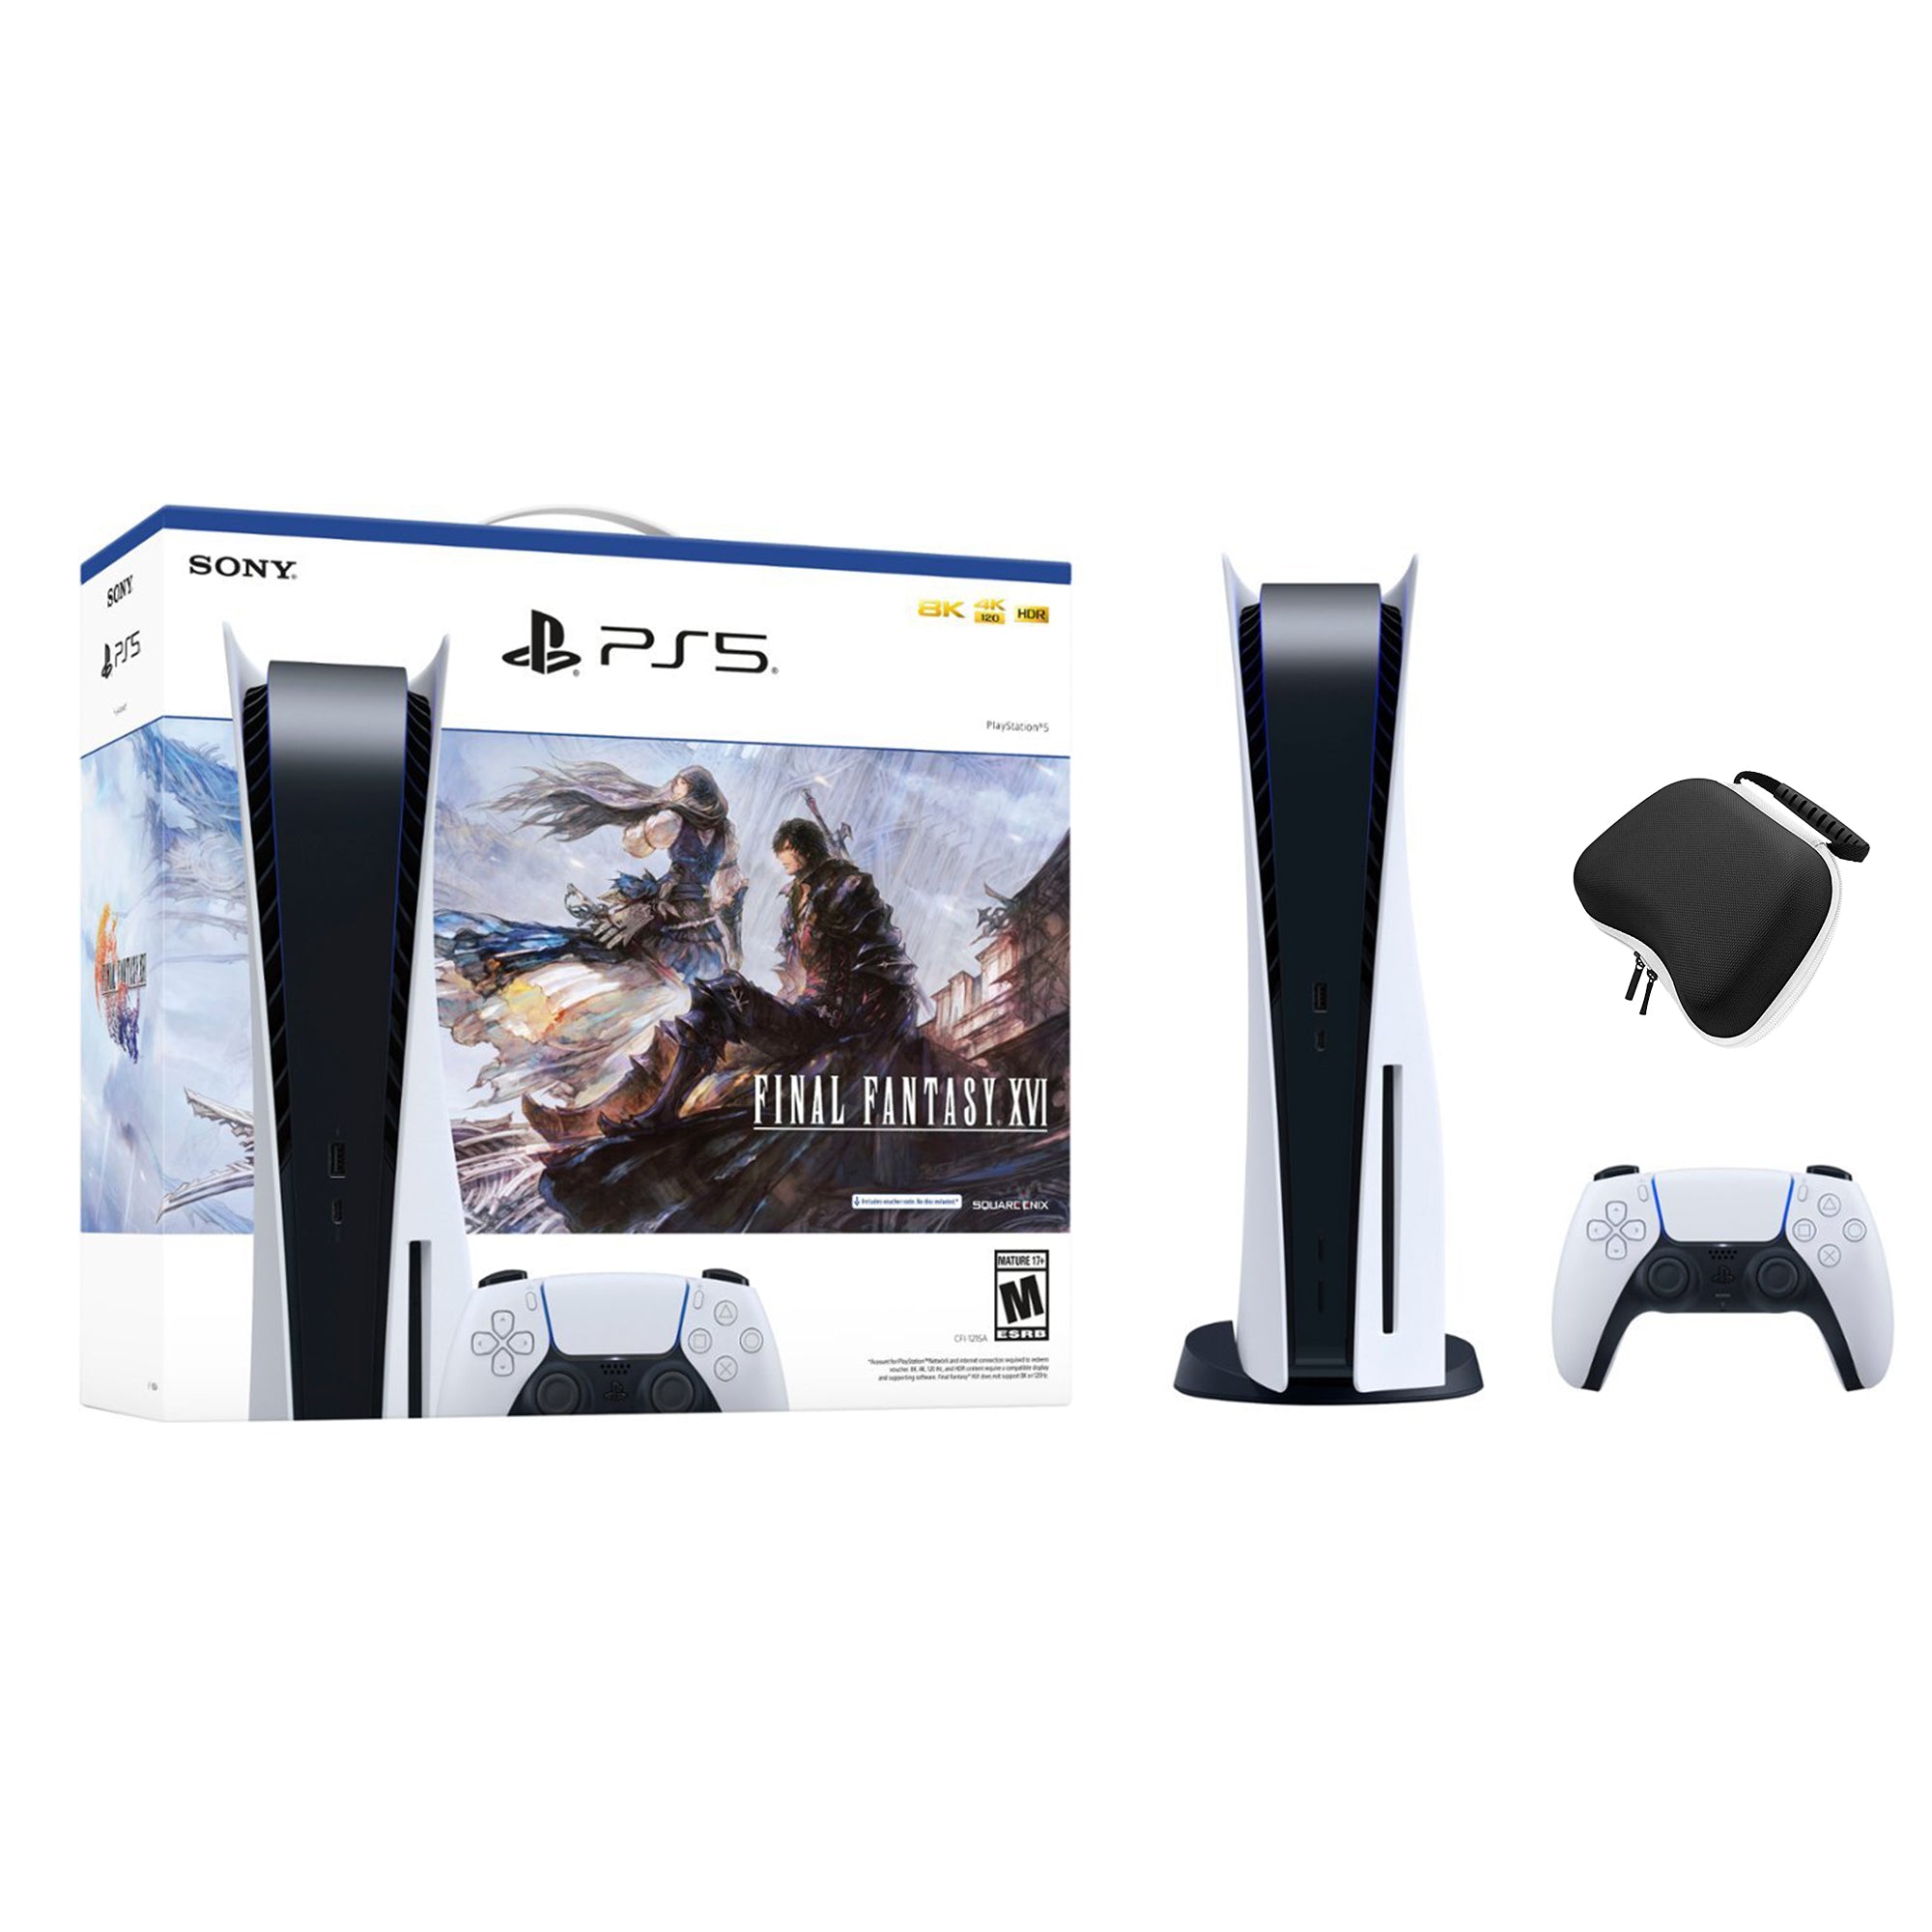 PlayStation 5 Disc Edition FINAL FANTASY XVI Bundle and Mytrix Controller Case - White, PS5 825GB Gaming Console